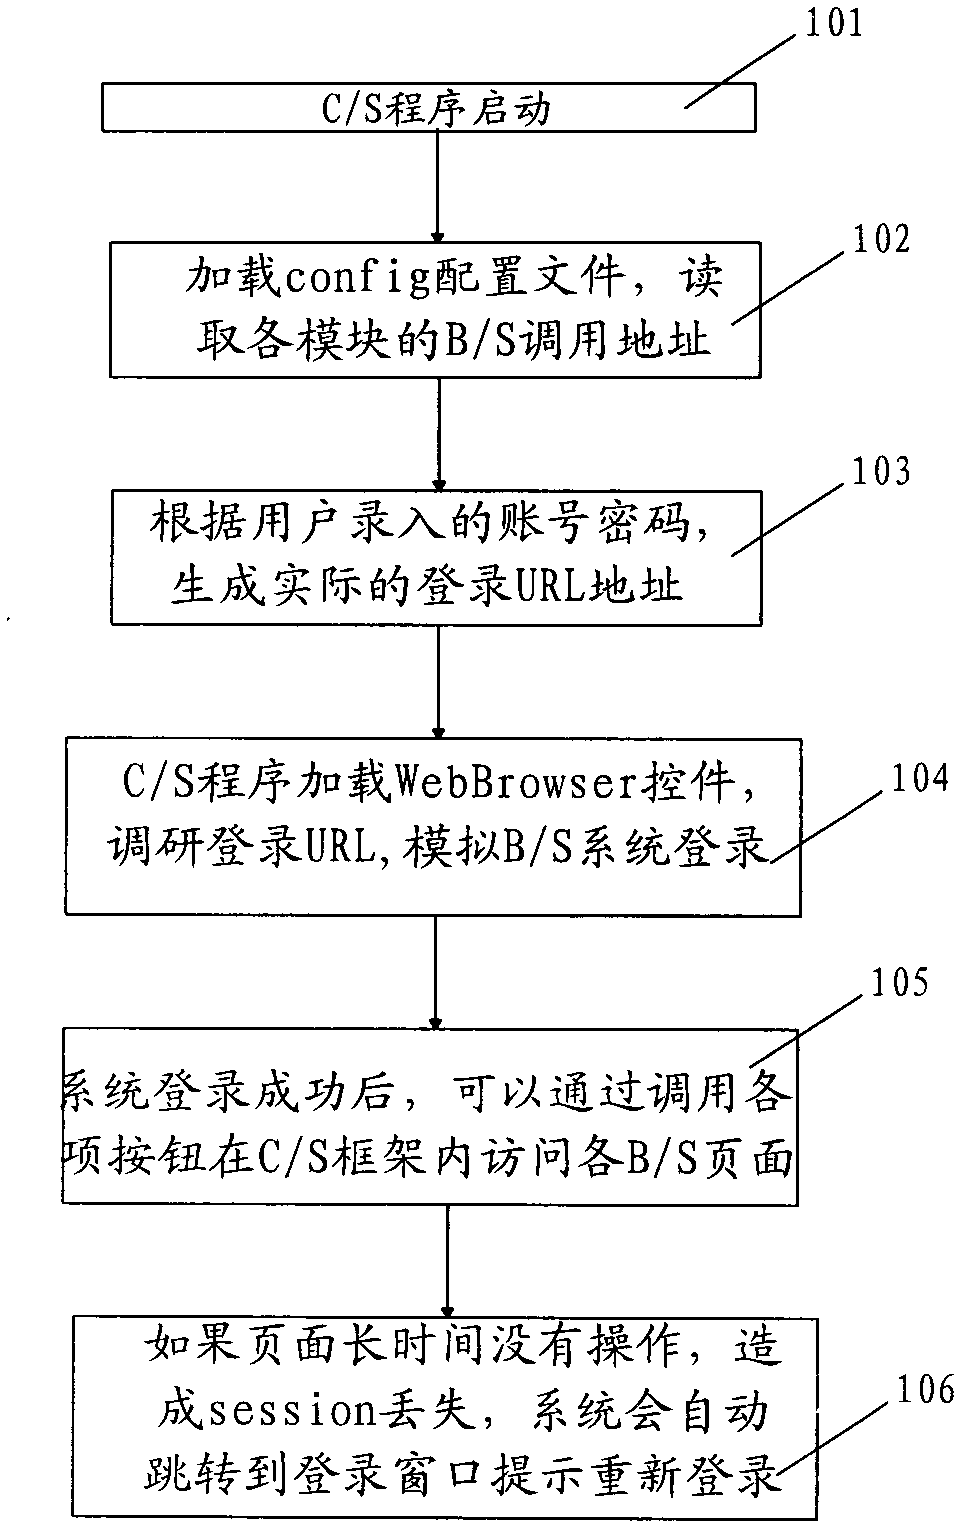 Method for inquiring logistics information in real time